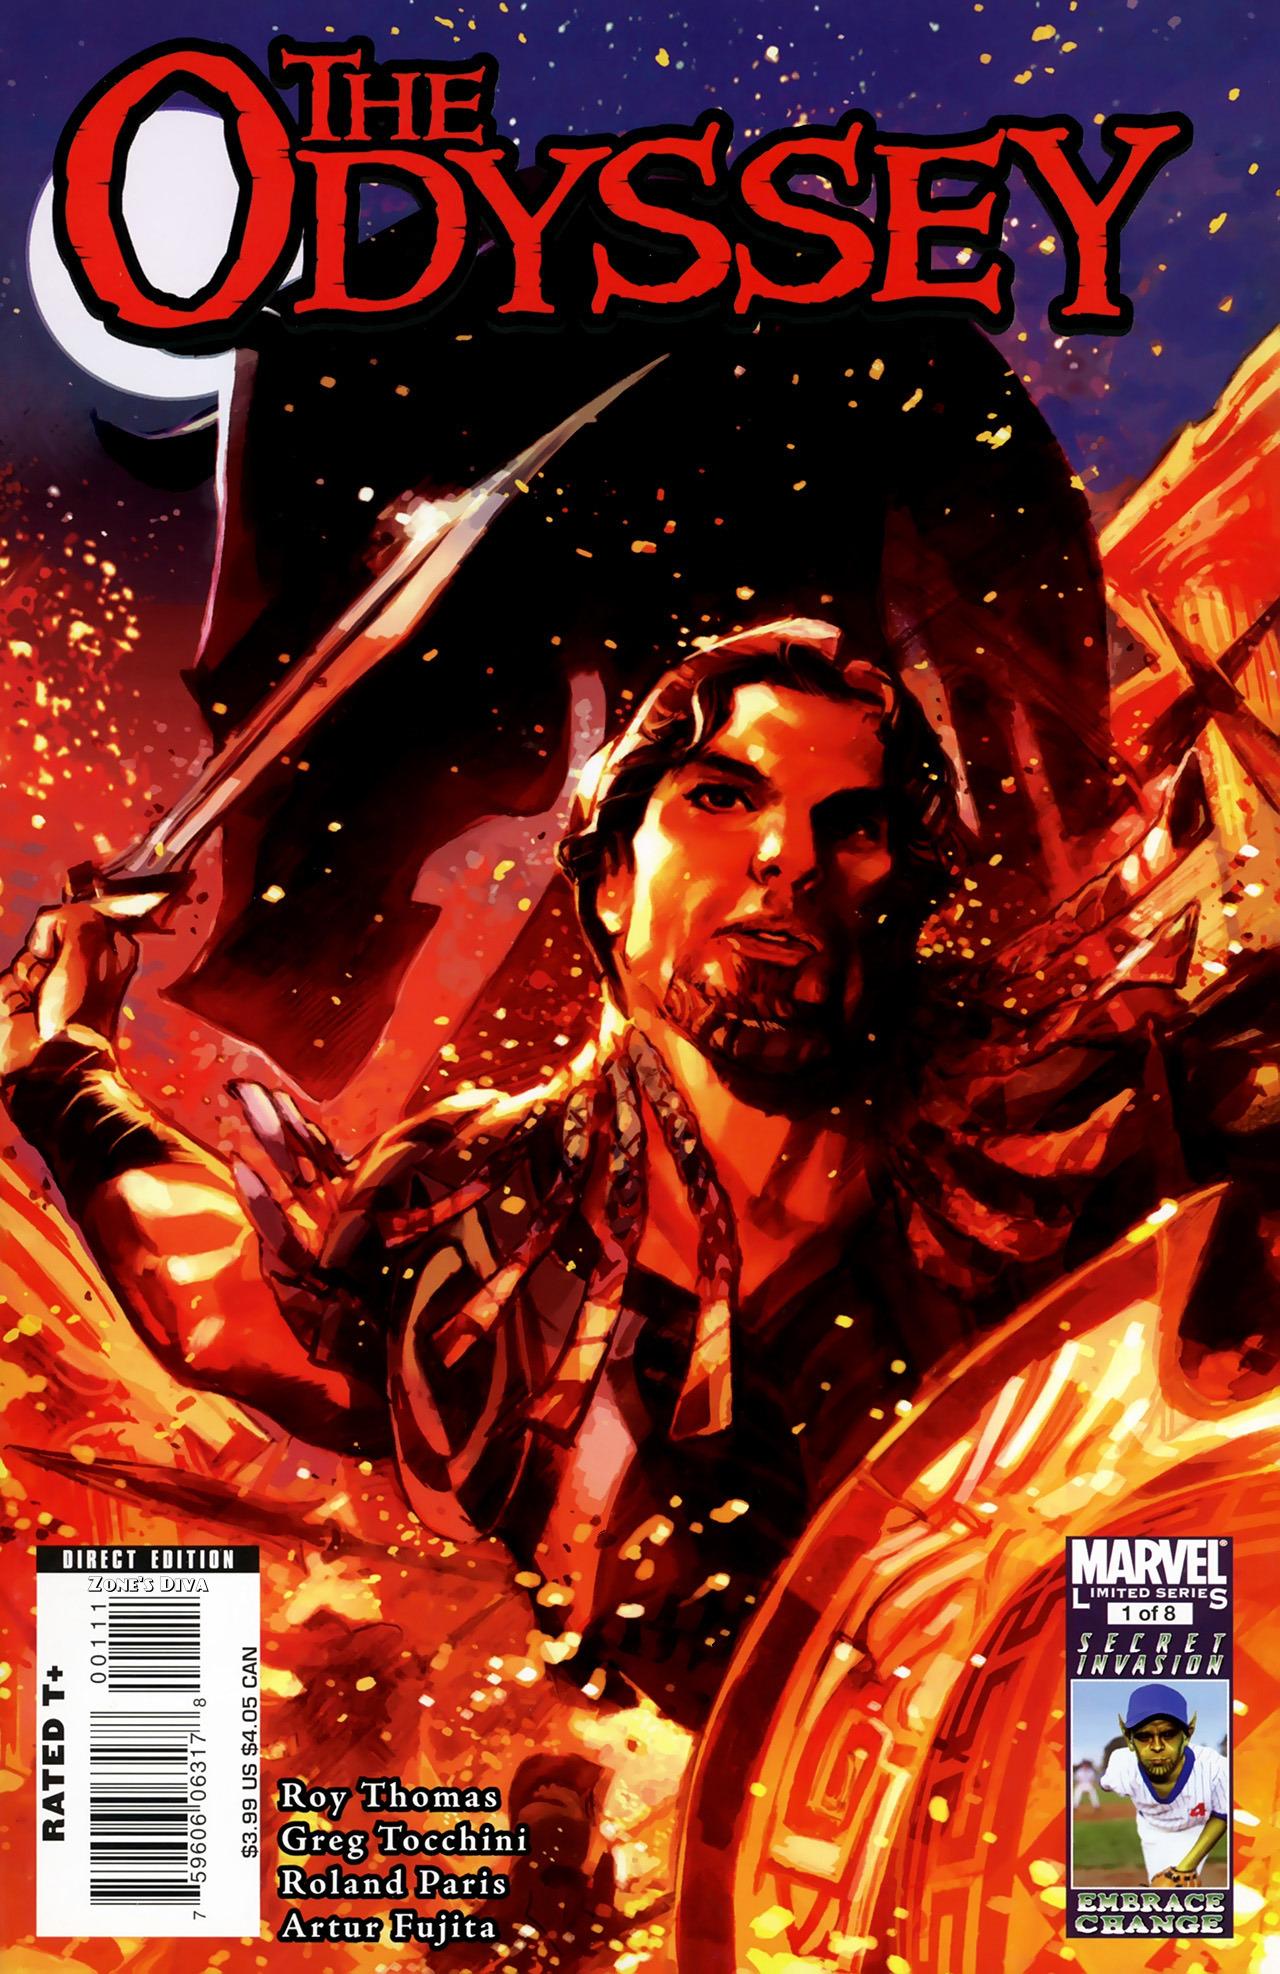 Marvel Illustrated: The Odyssey Vol. 1 #1